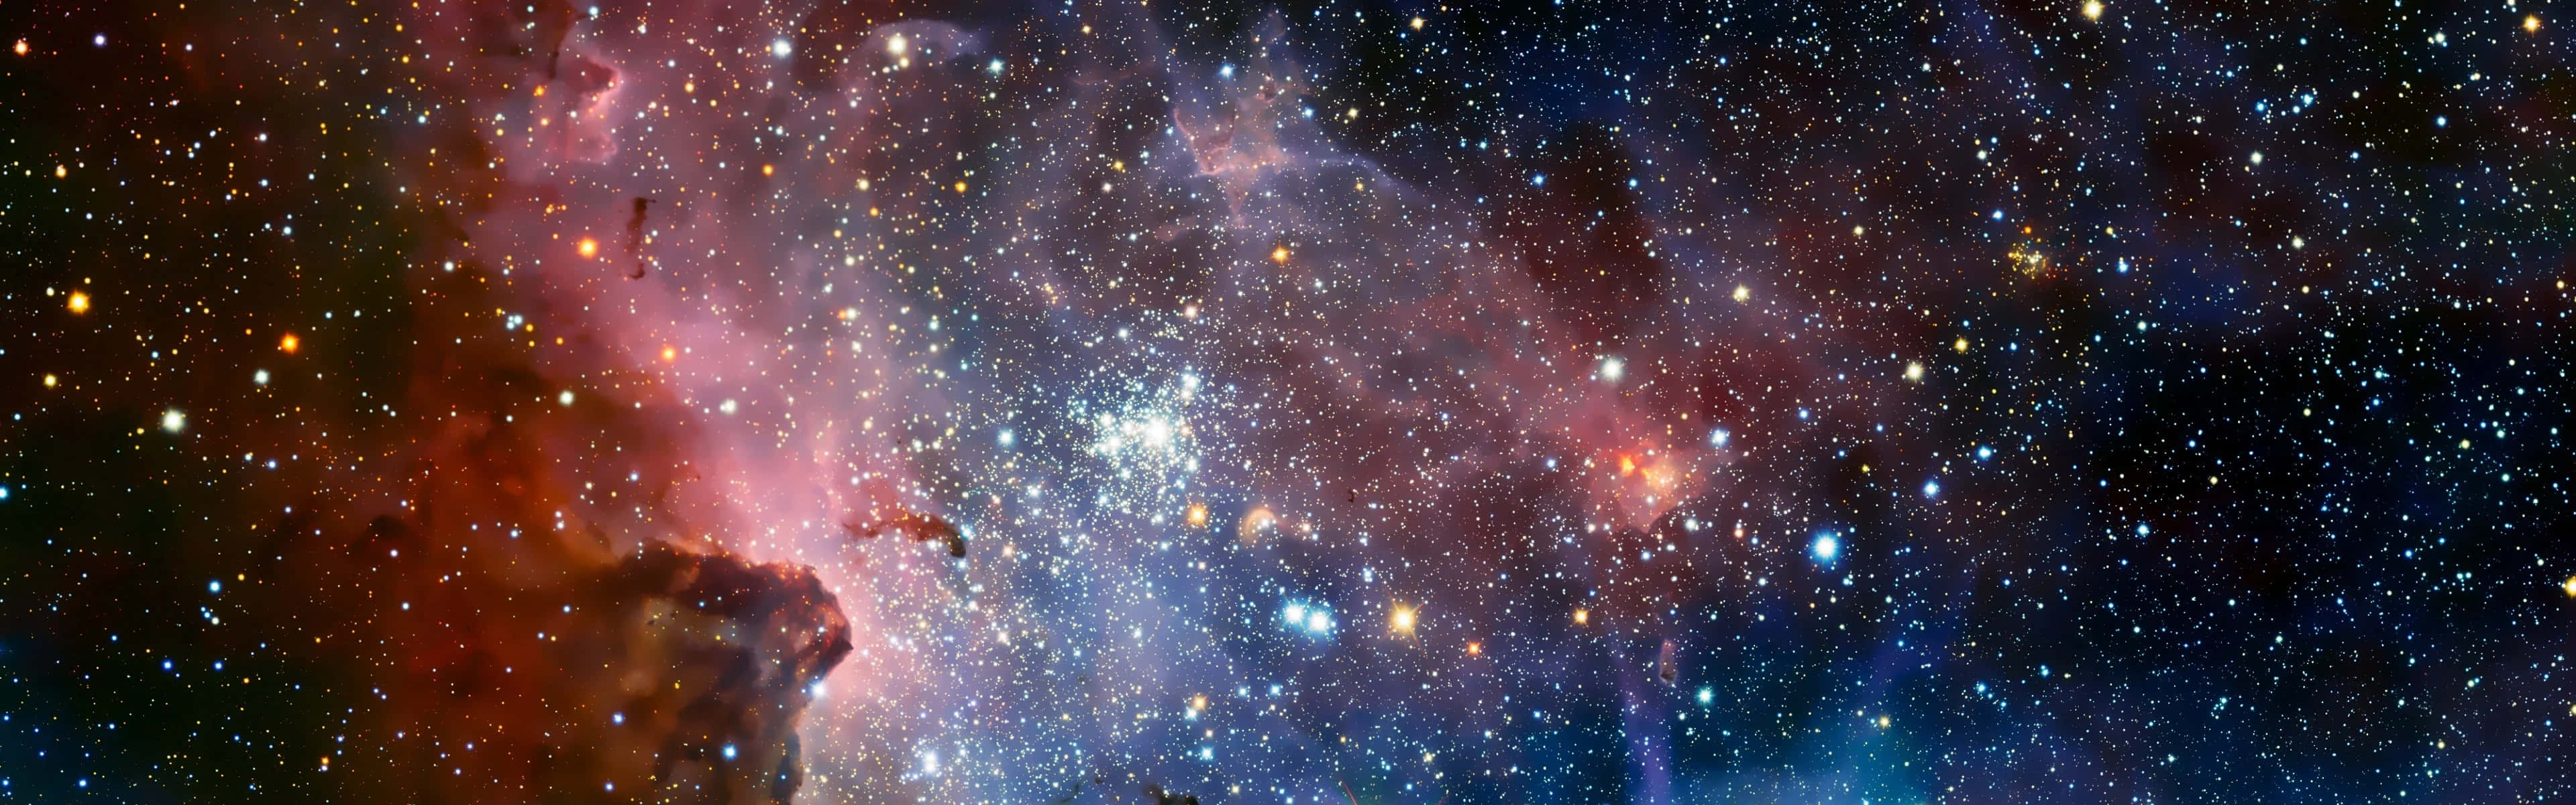 A View Of The Nebula With Stars And Stars Wallpaper